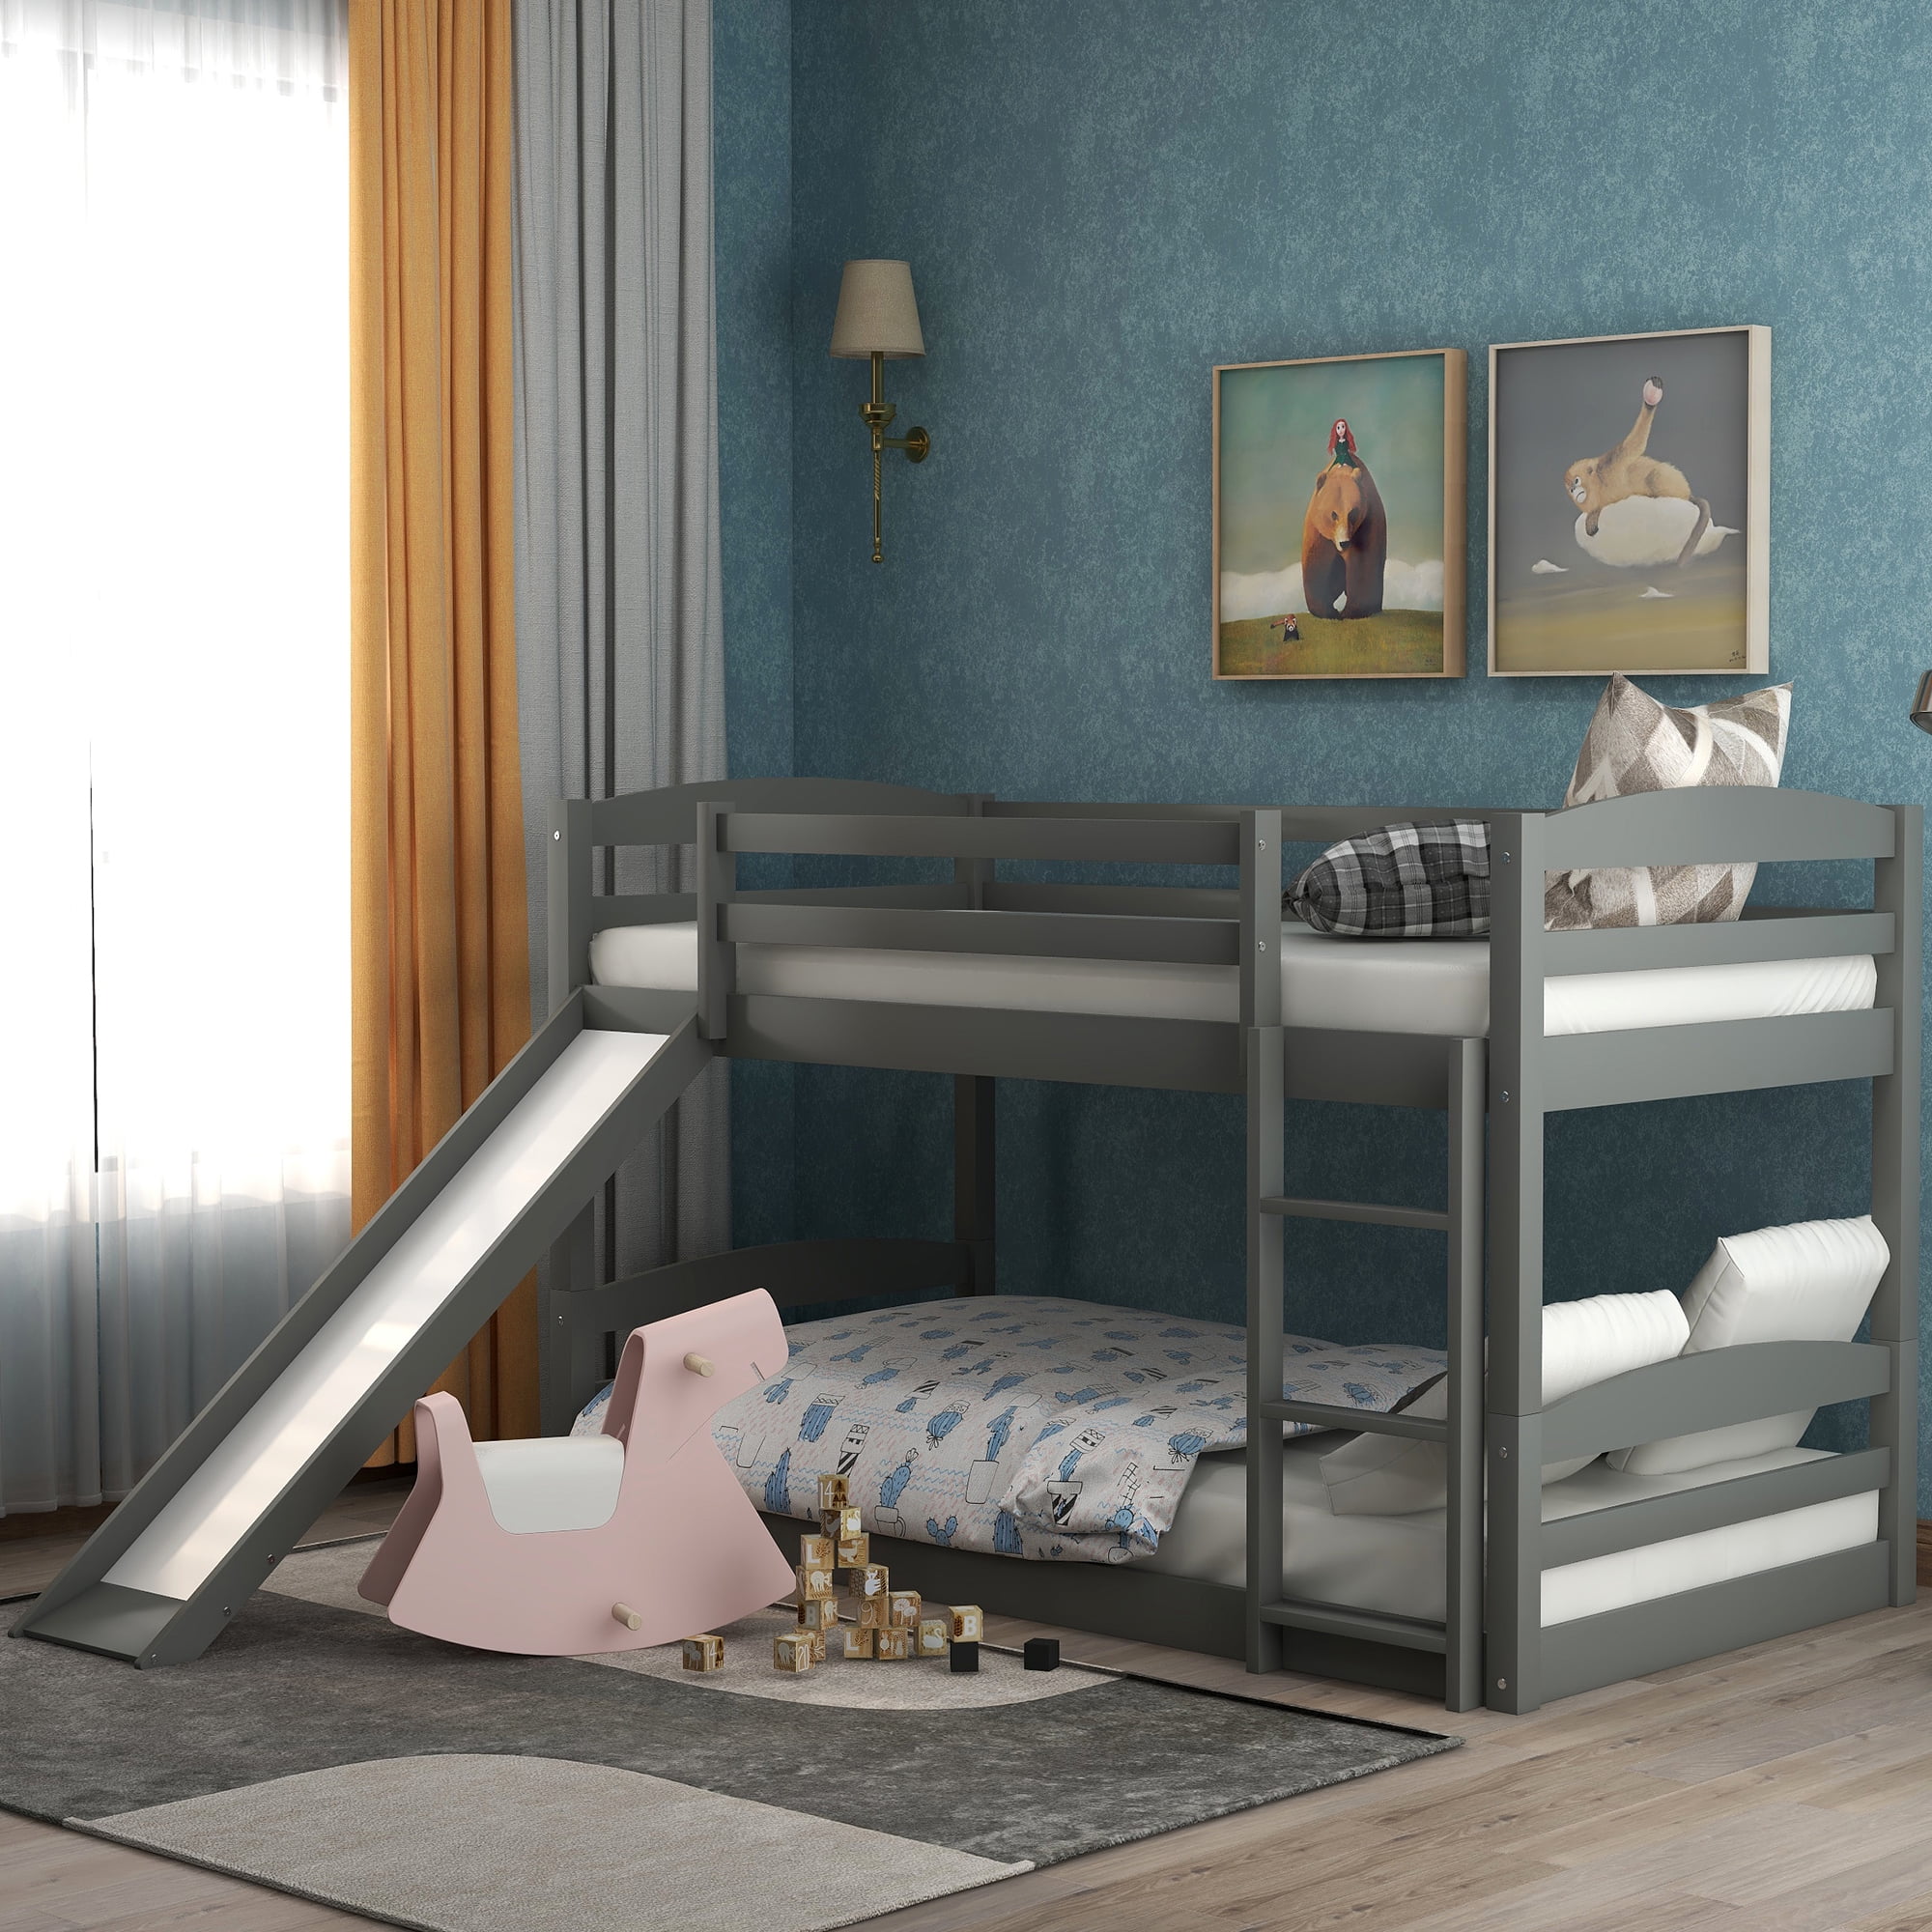 Euroco Twin Over Low Bunk Bed With, Bunk Bed Slide Only